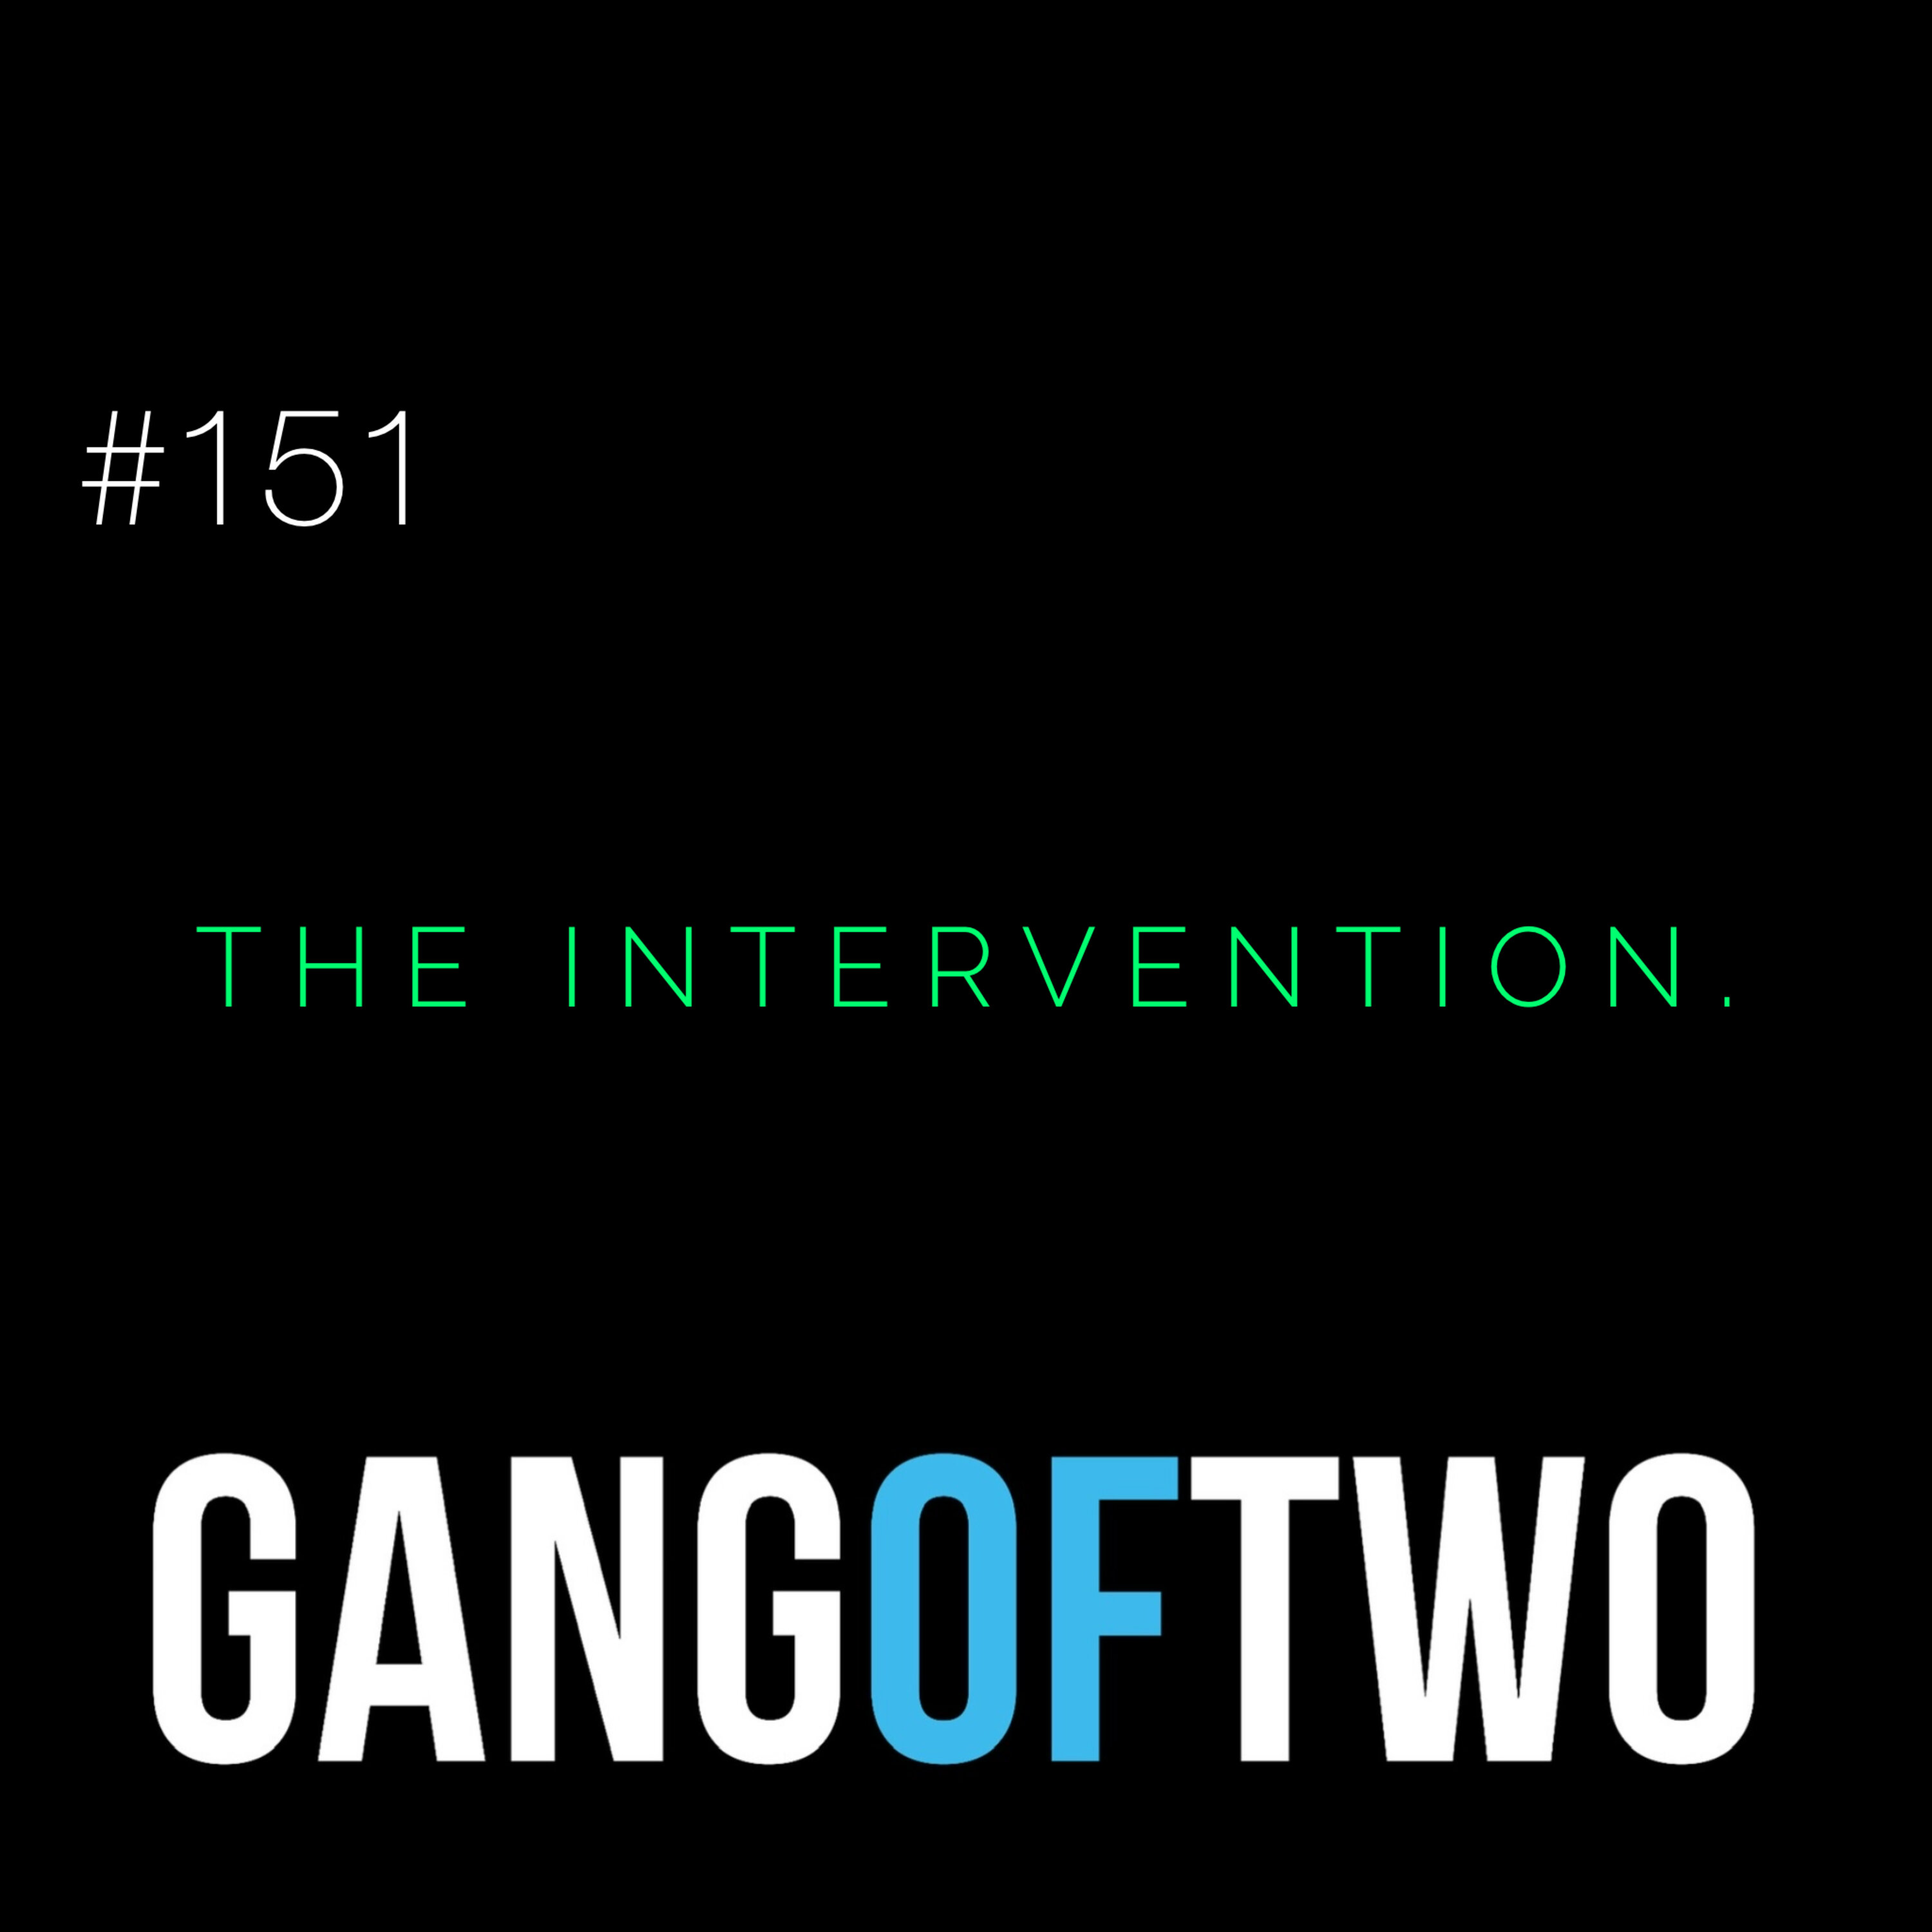 THE INTERVENTION. Image